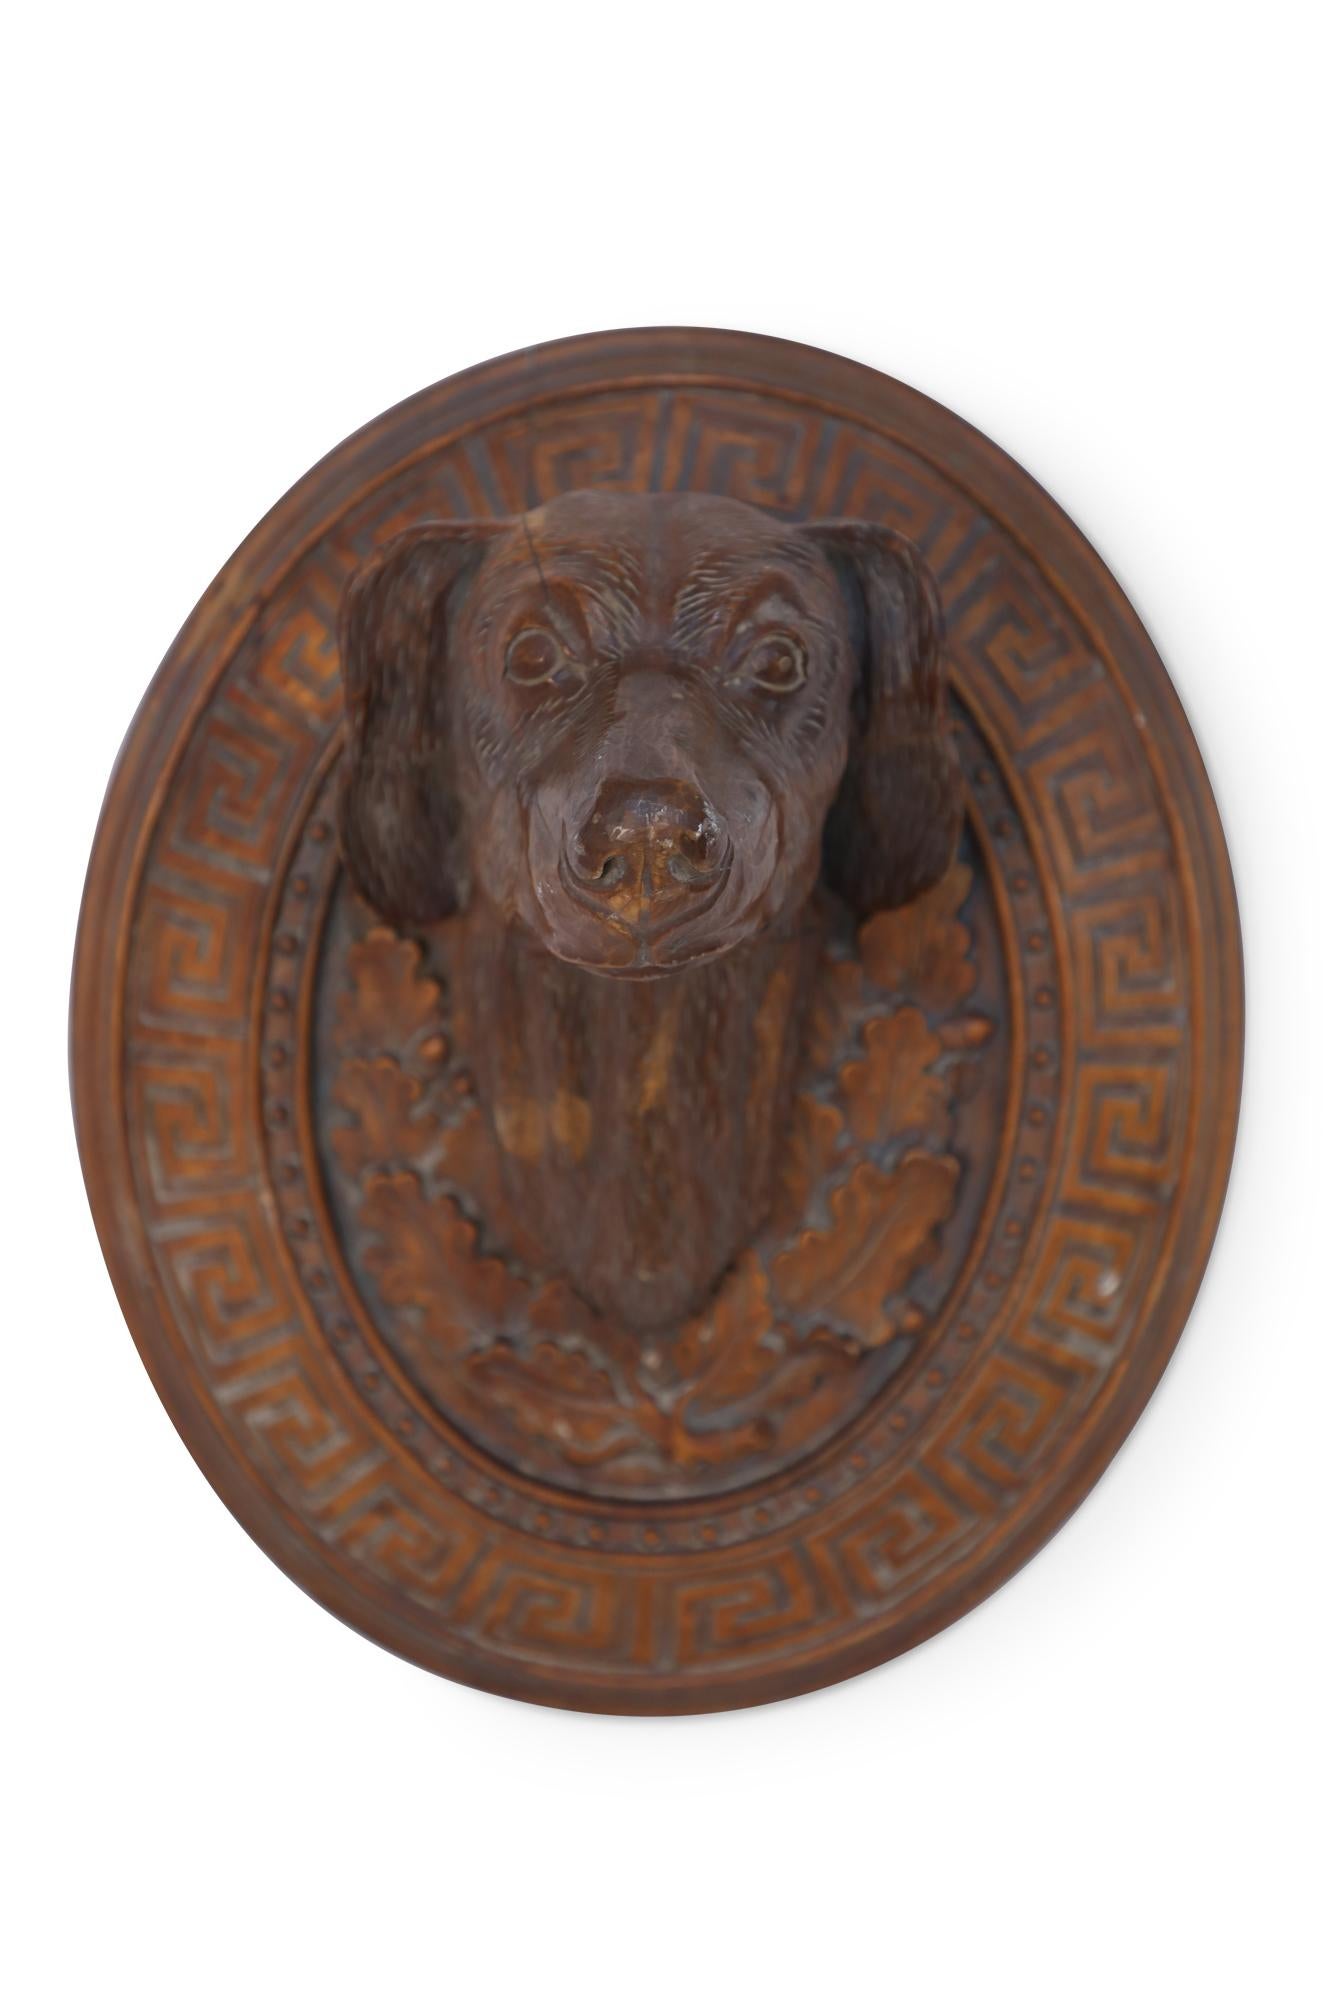 Pair of similar vintage carved wooden wall plaques featuring centered dog heads surrounded by acanthus leaves and a Greek key border.